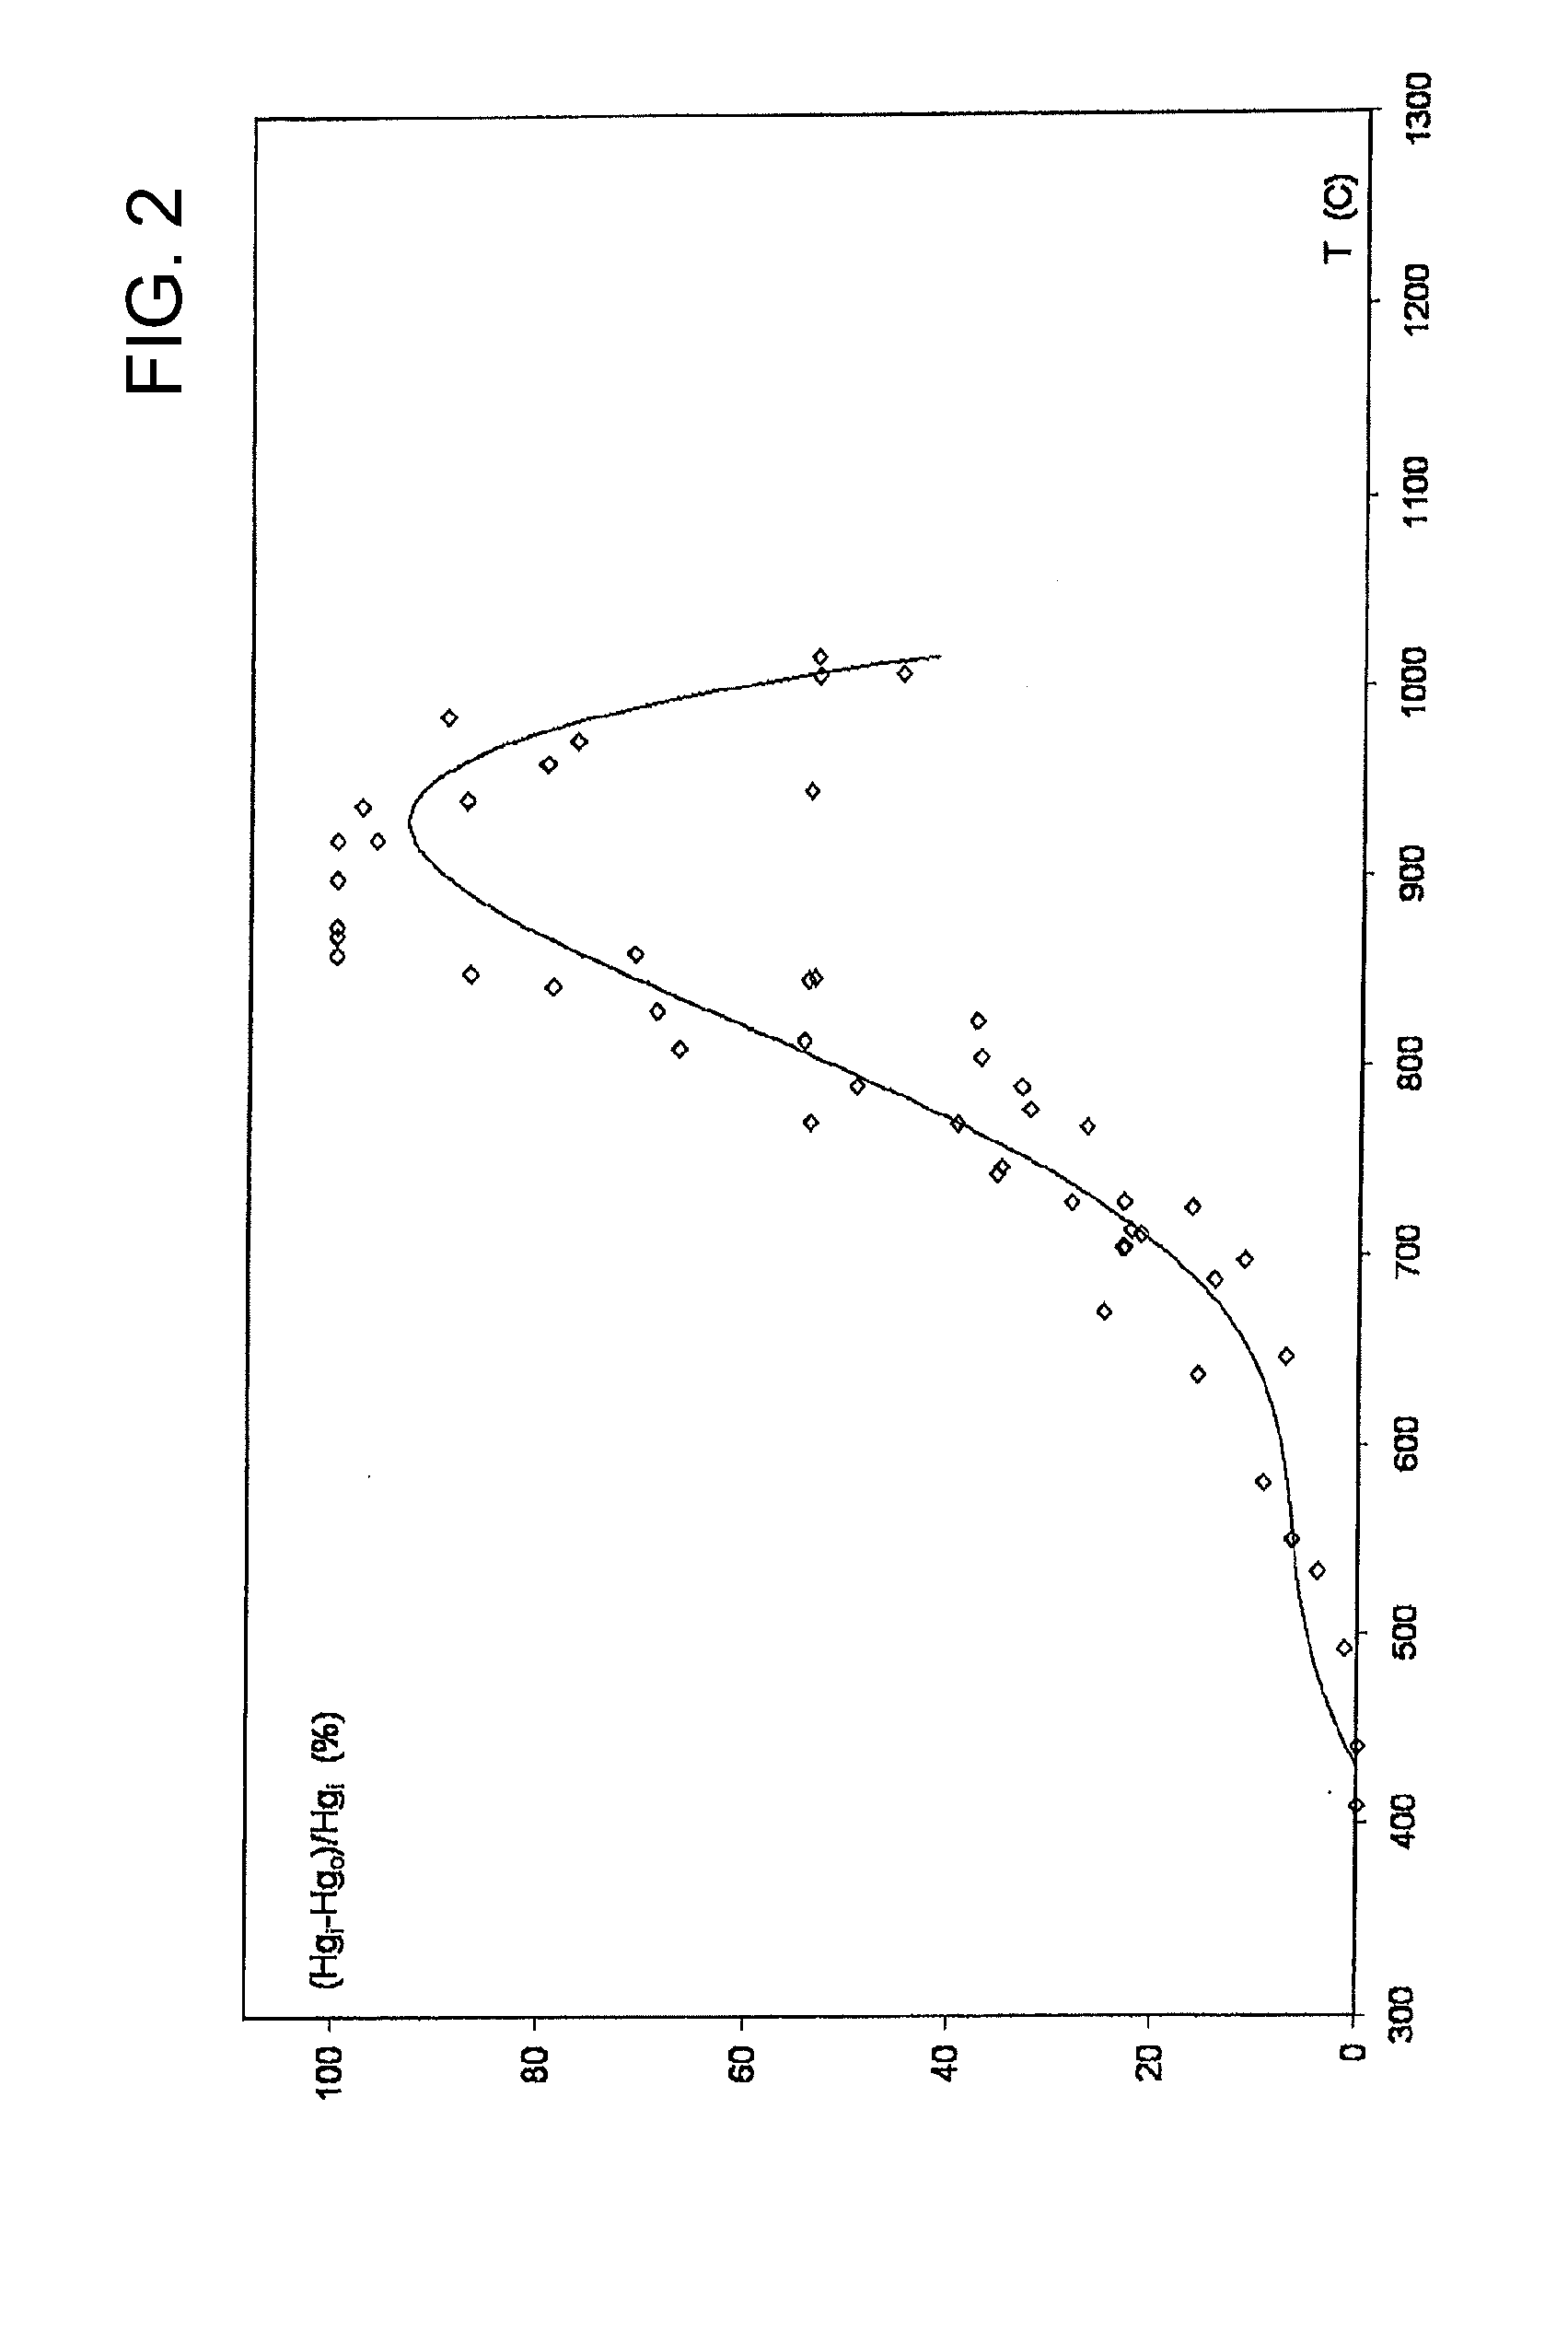 Method for the removal of mercury from a stream of flue gas obtained from the combustion of coal